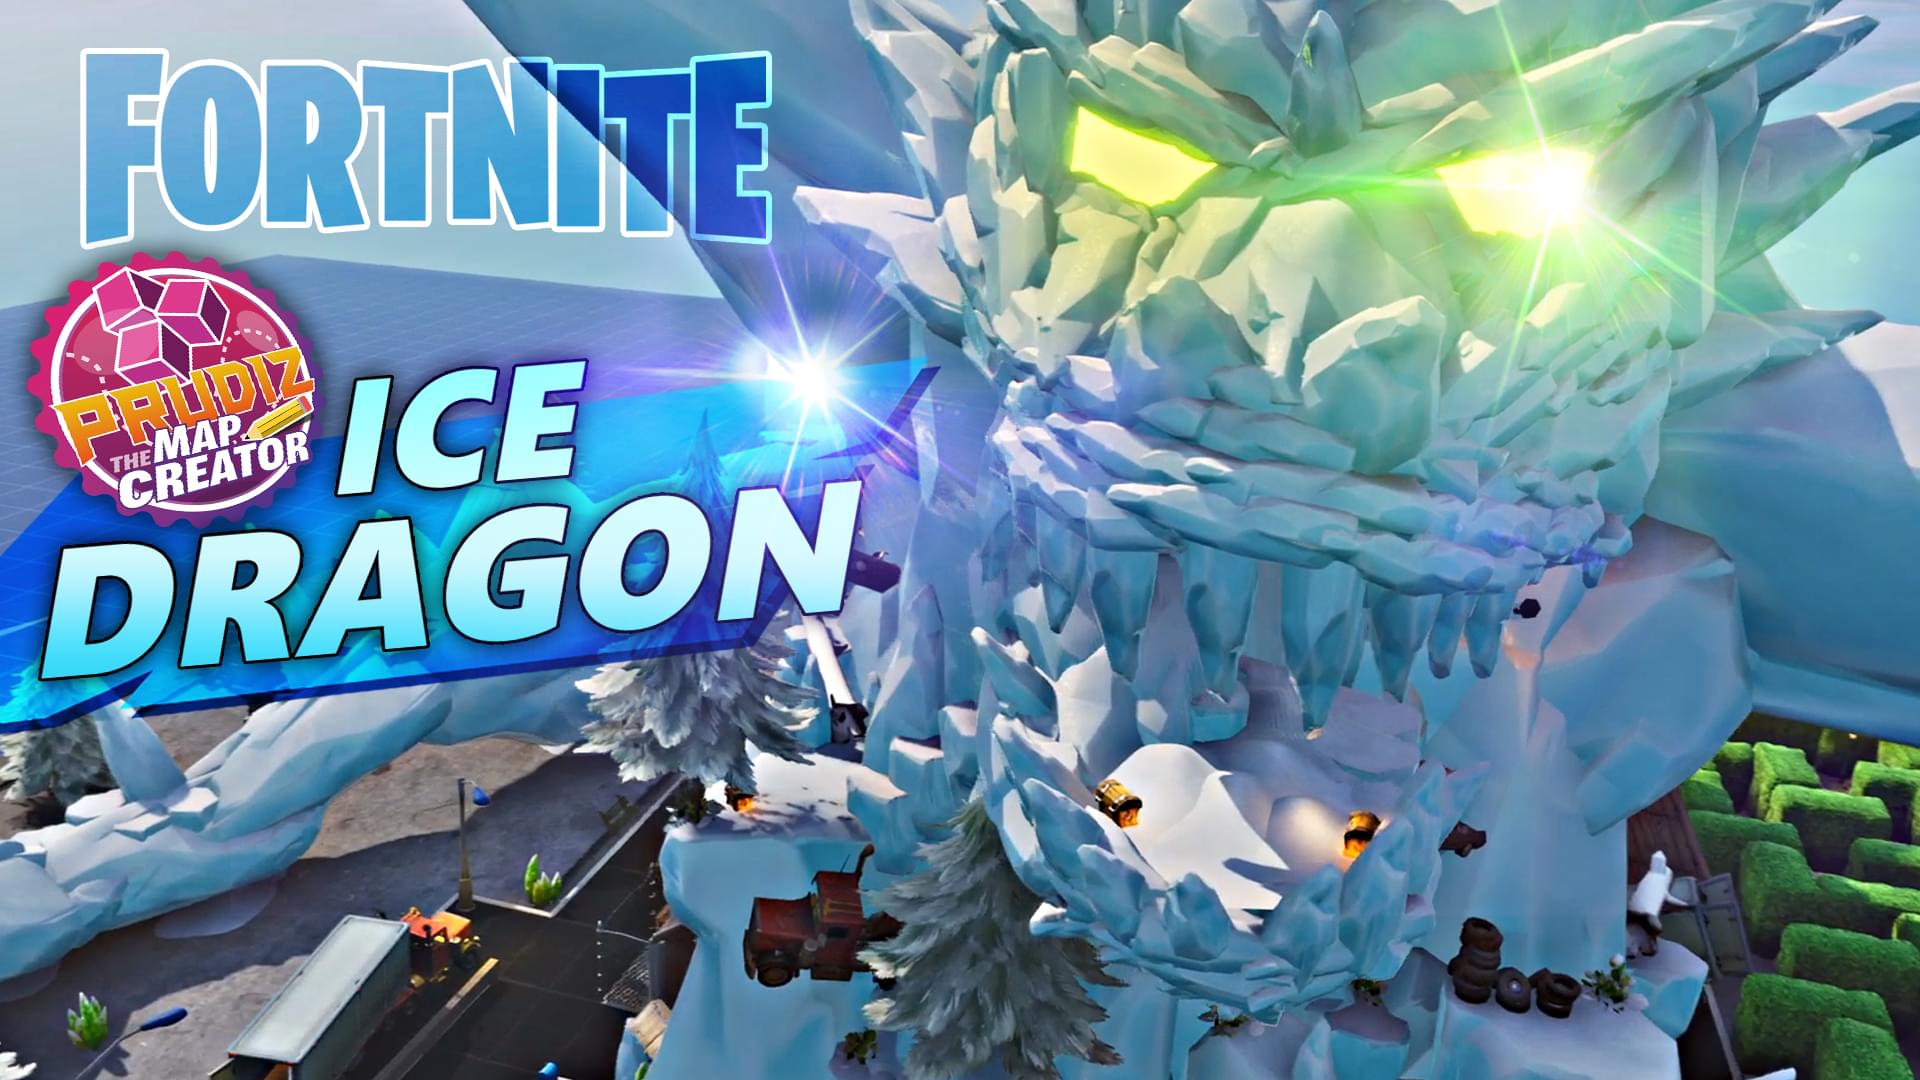 Fortnite Creative The Rising Ice Dragon By Prudiz - fortnite creative the rising ice dragon